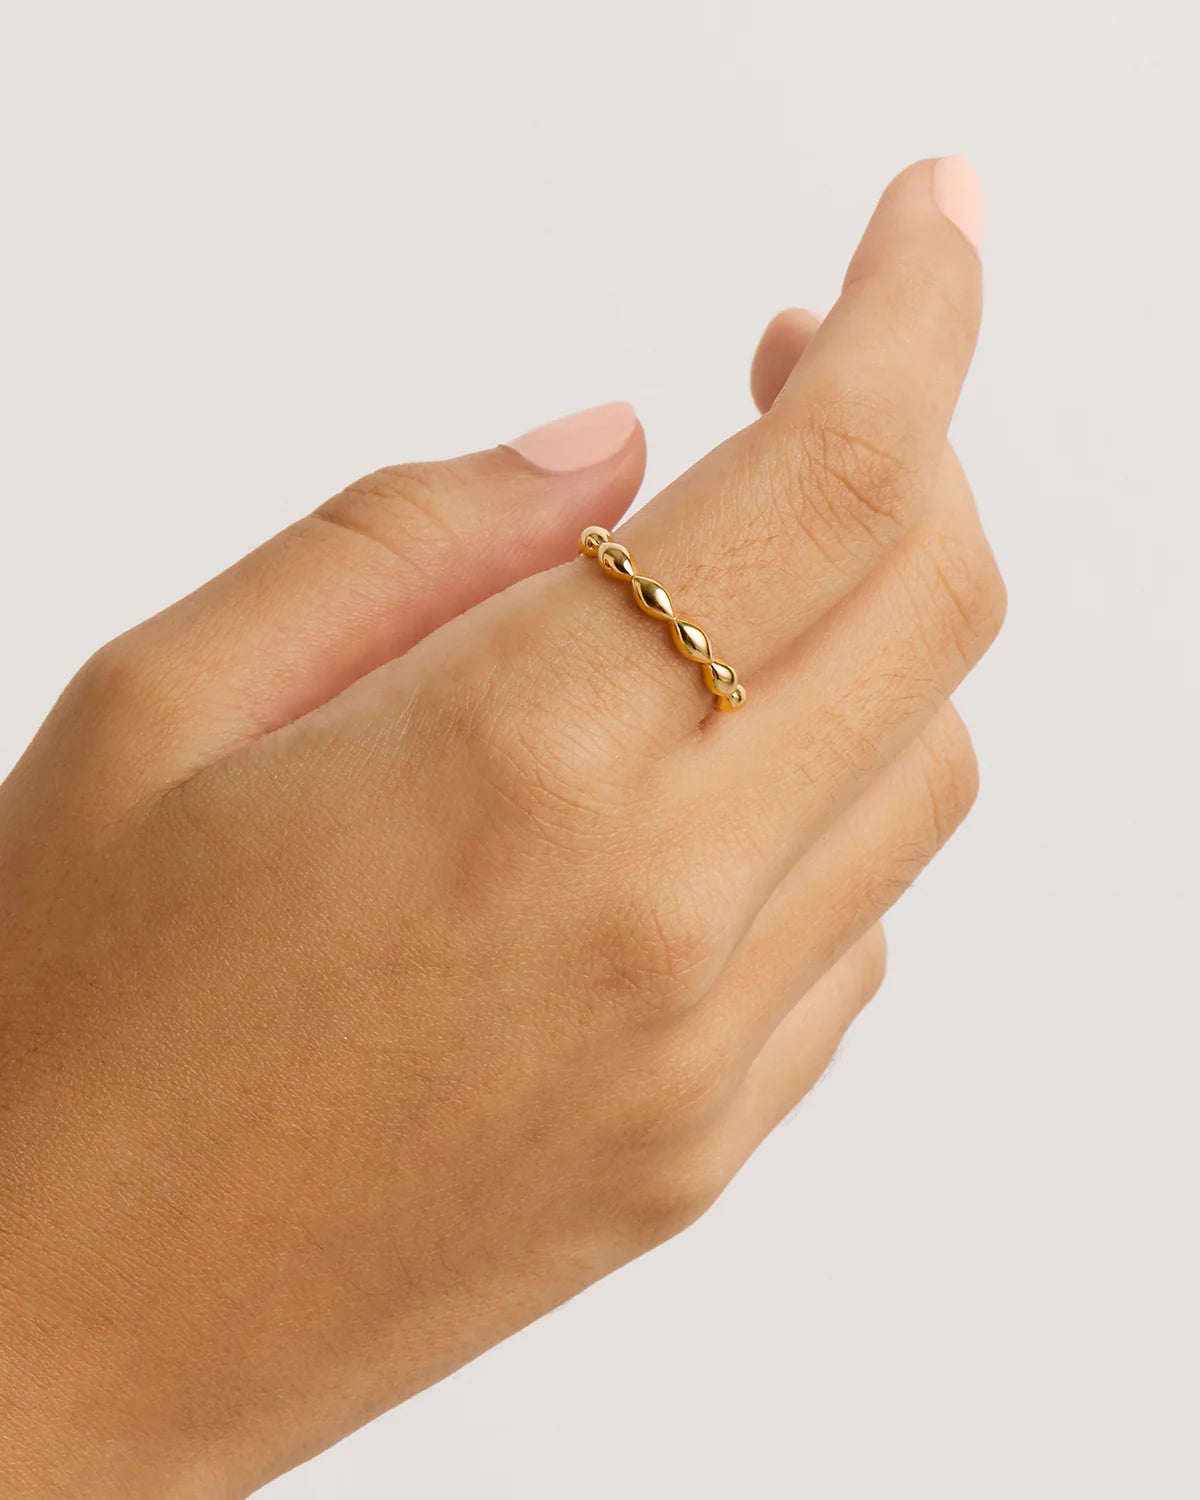 PROTECTED PATH RING - 18KT VERMEIL GOLD